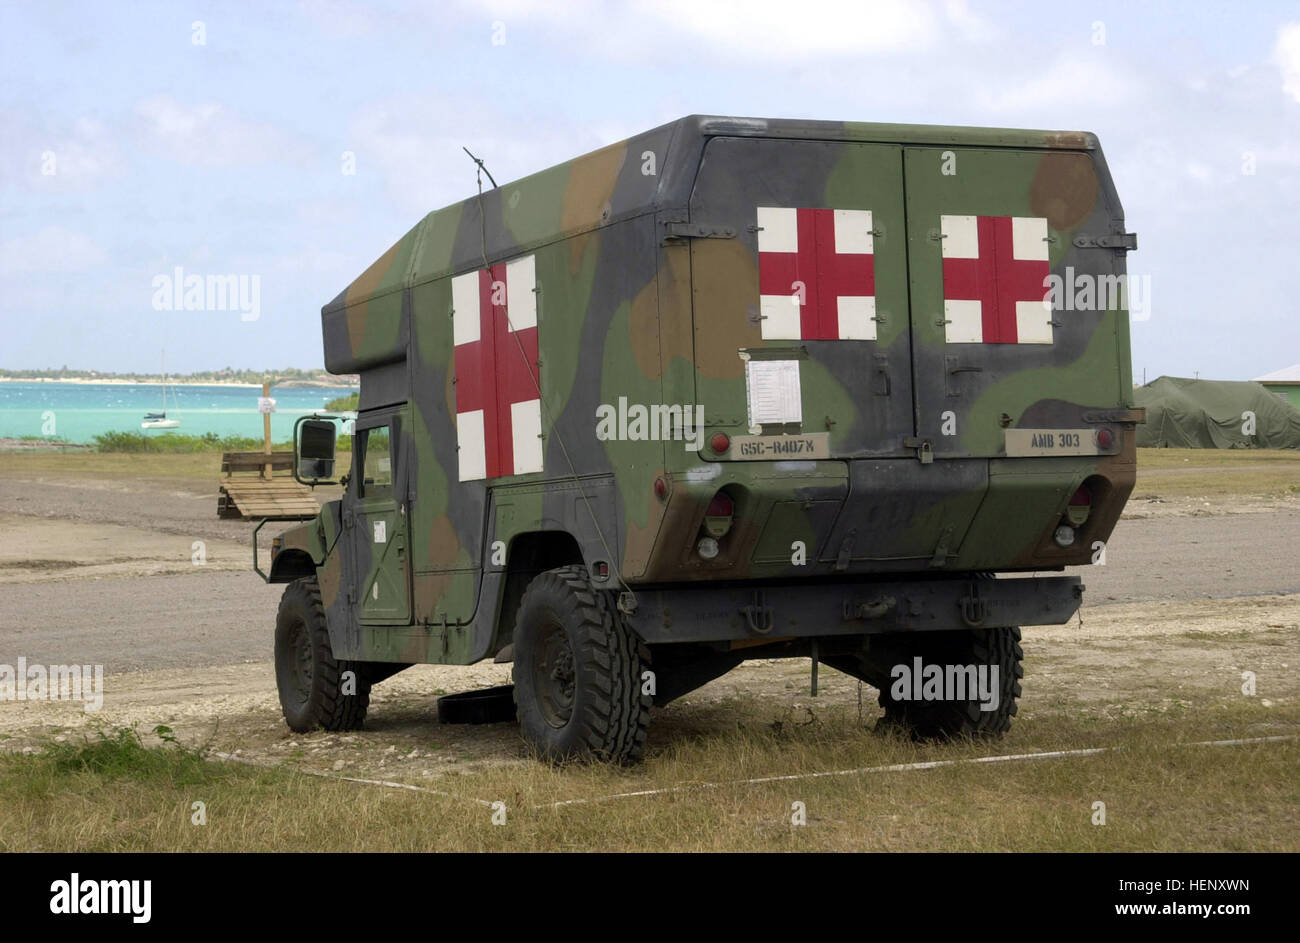 A High-Mobility Multipurpose Wheeled Vehicle (HMMWV) M-997 ambulance from the 407th Ambulance Company (AC), with the 369th Combat Support Hospital (CSH), 65th Regional Support Command (RSC), Puerto Rico, sits on the Crabbs Peninsula, during the Tradewinds 2002 Field Training Exercise (FTX), on the island of Antigua. US Army Ambulance Stock Photo